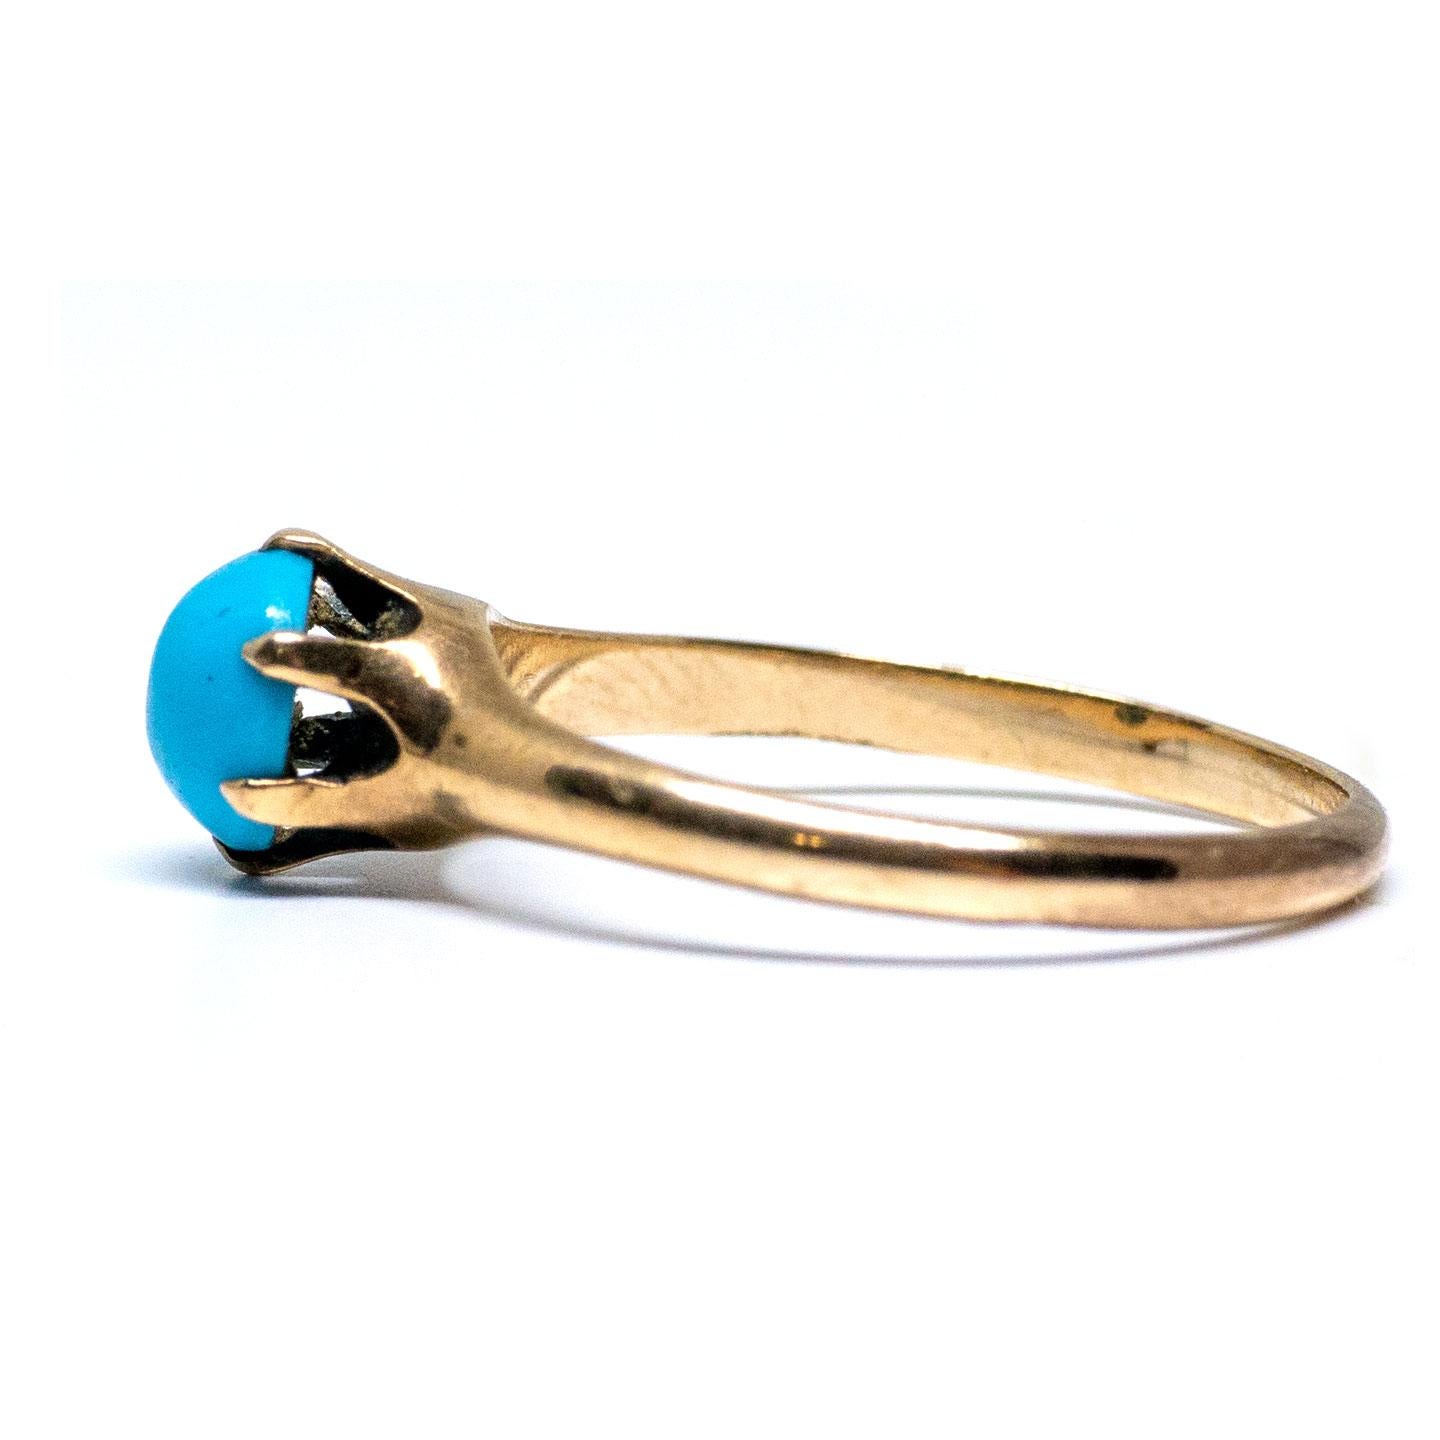 Description: 
This little sweetheart is the perfect addition to any vintage jewelry lover's collection! The genuine turquoise cab is a lovely shade of robins egg blue that will complement so many styles. The low profile prong set head holds the